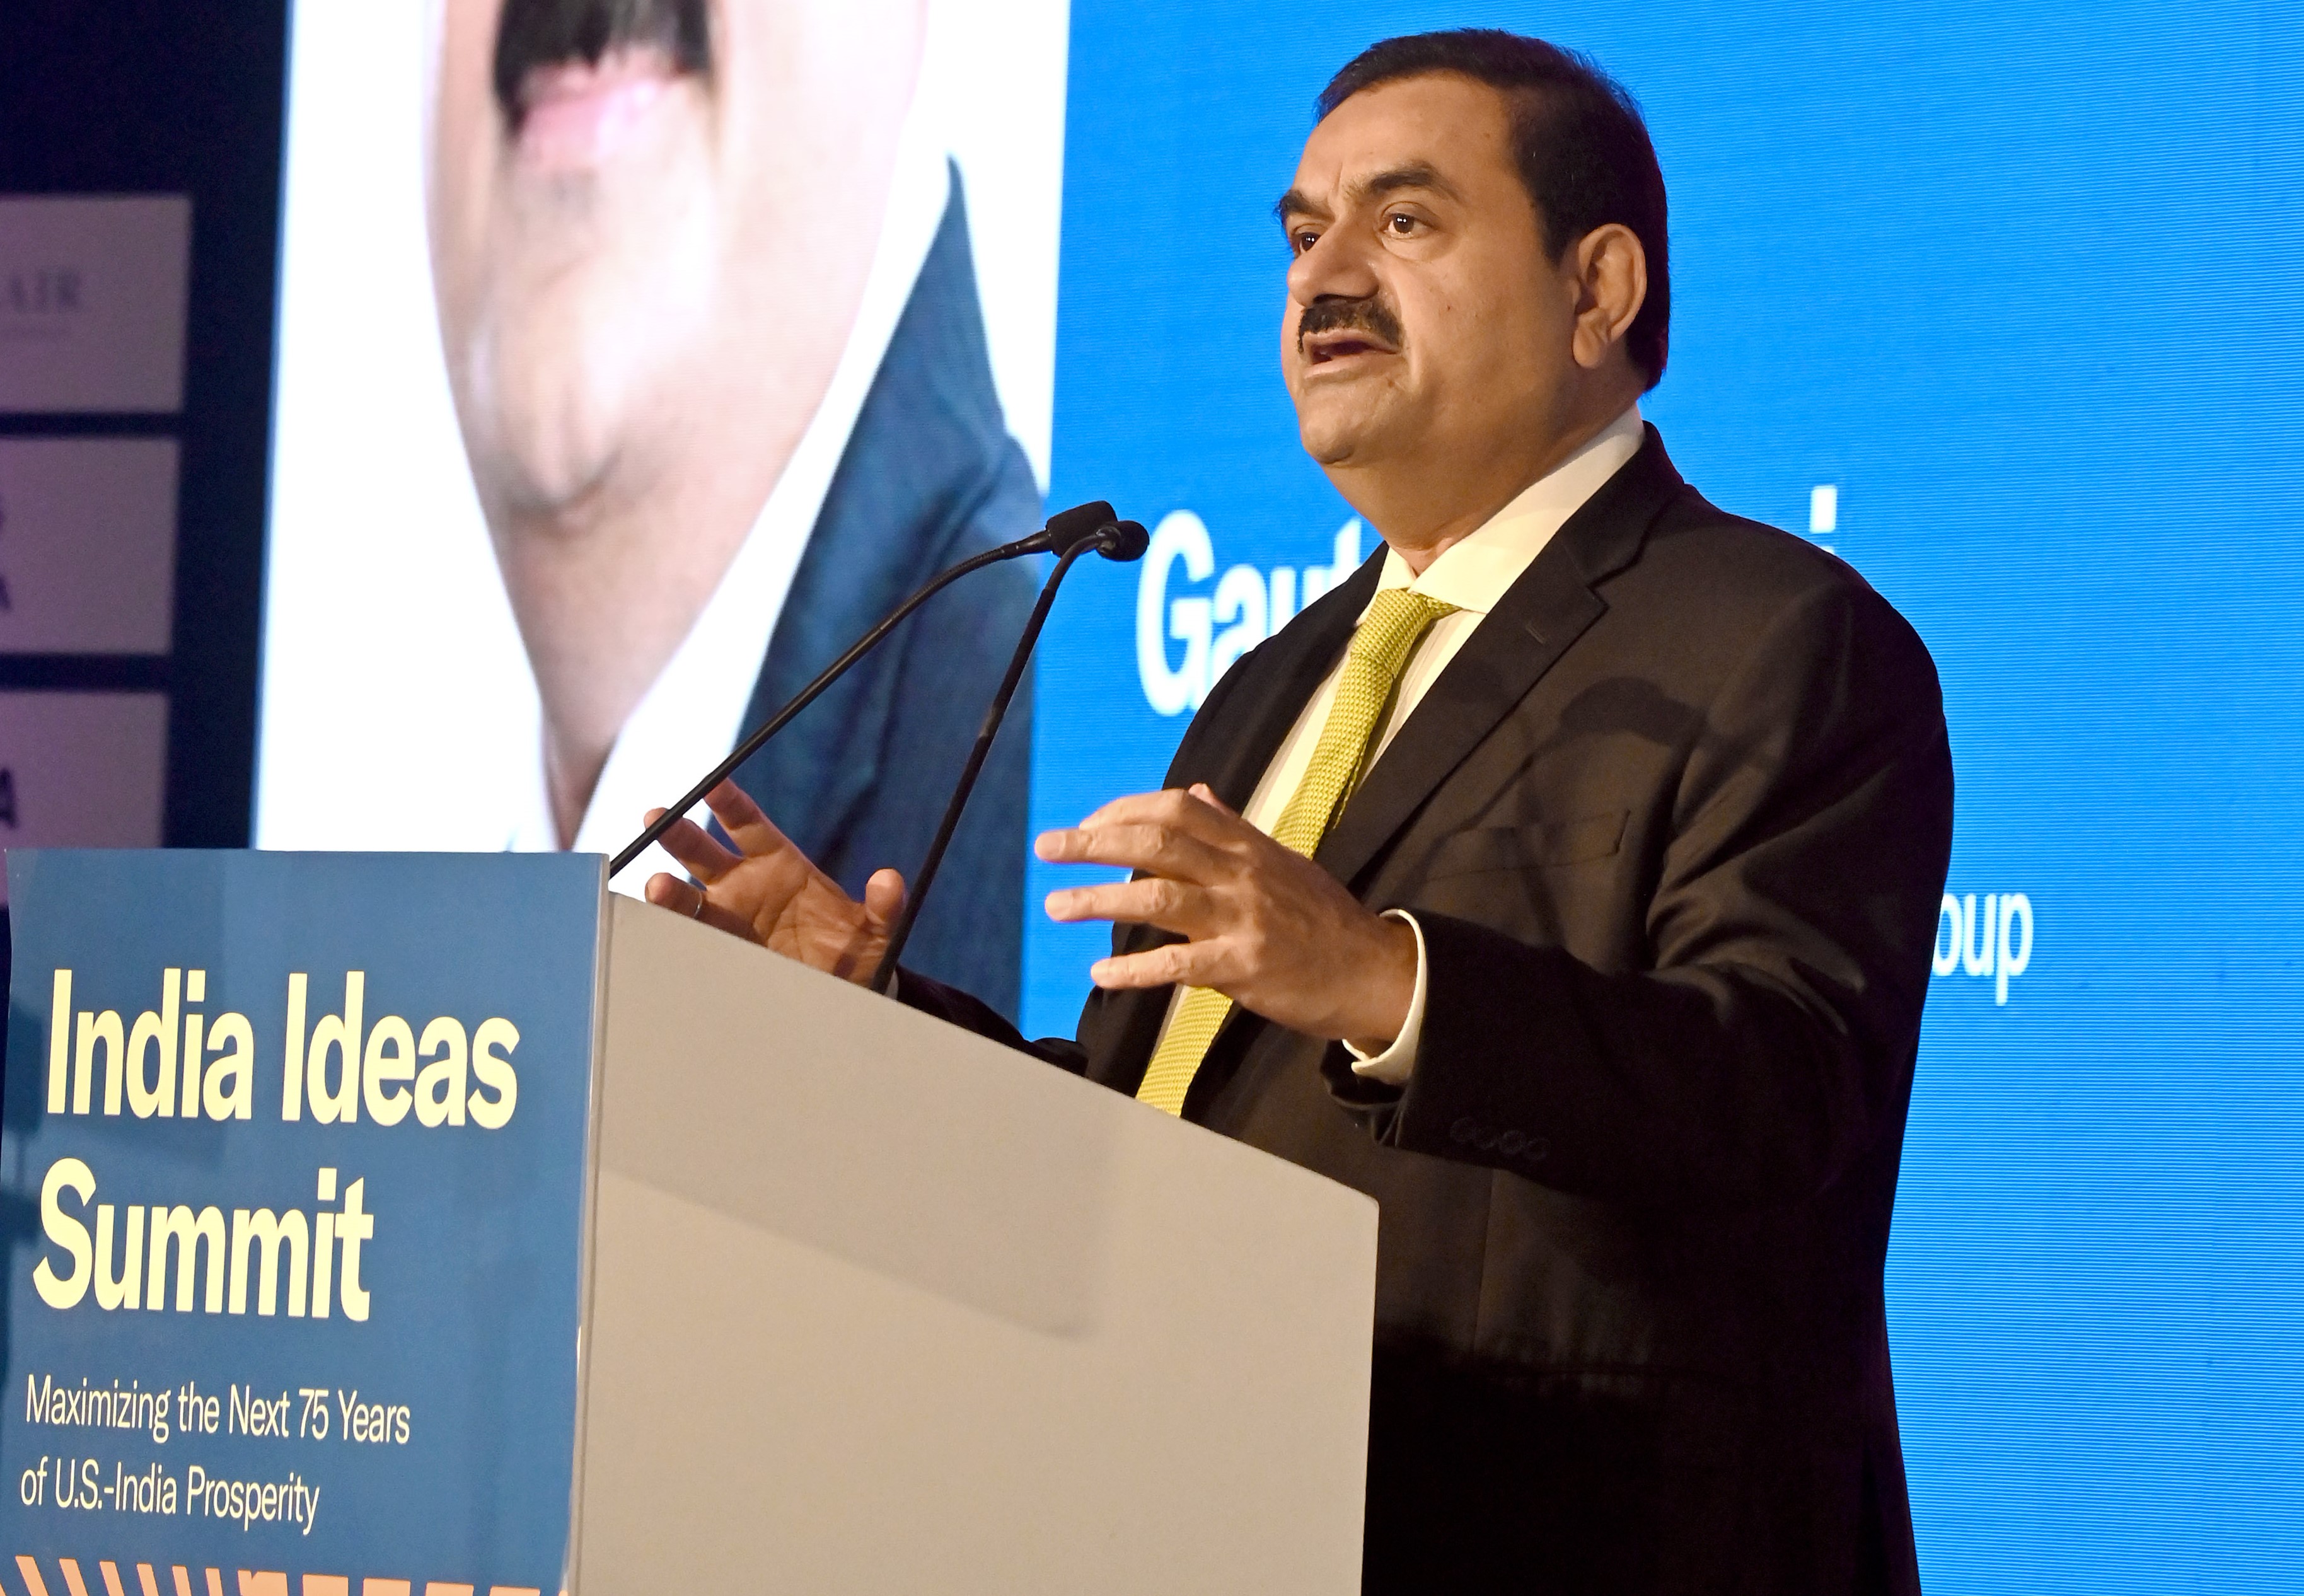 Adani slams Hindenburg as “an unethical short seller”, rebuts allegations as a “calculated attack” on India